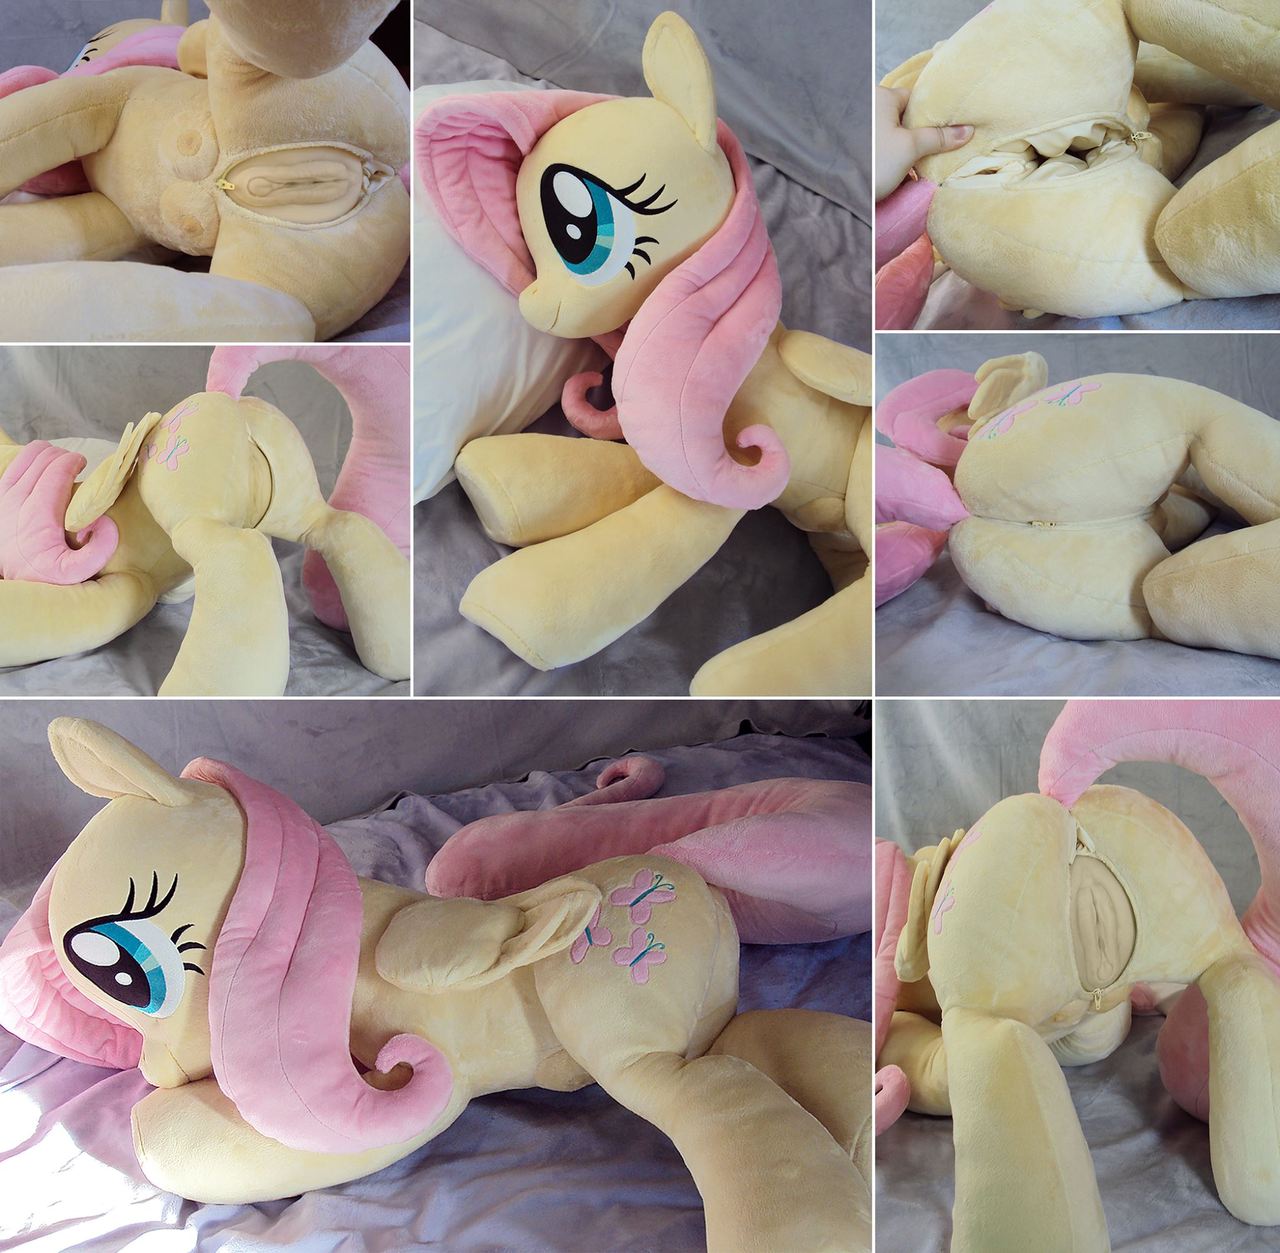 Fluttershy with horsecock dildo